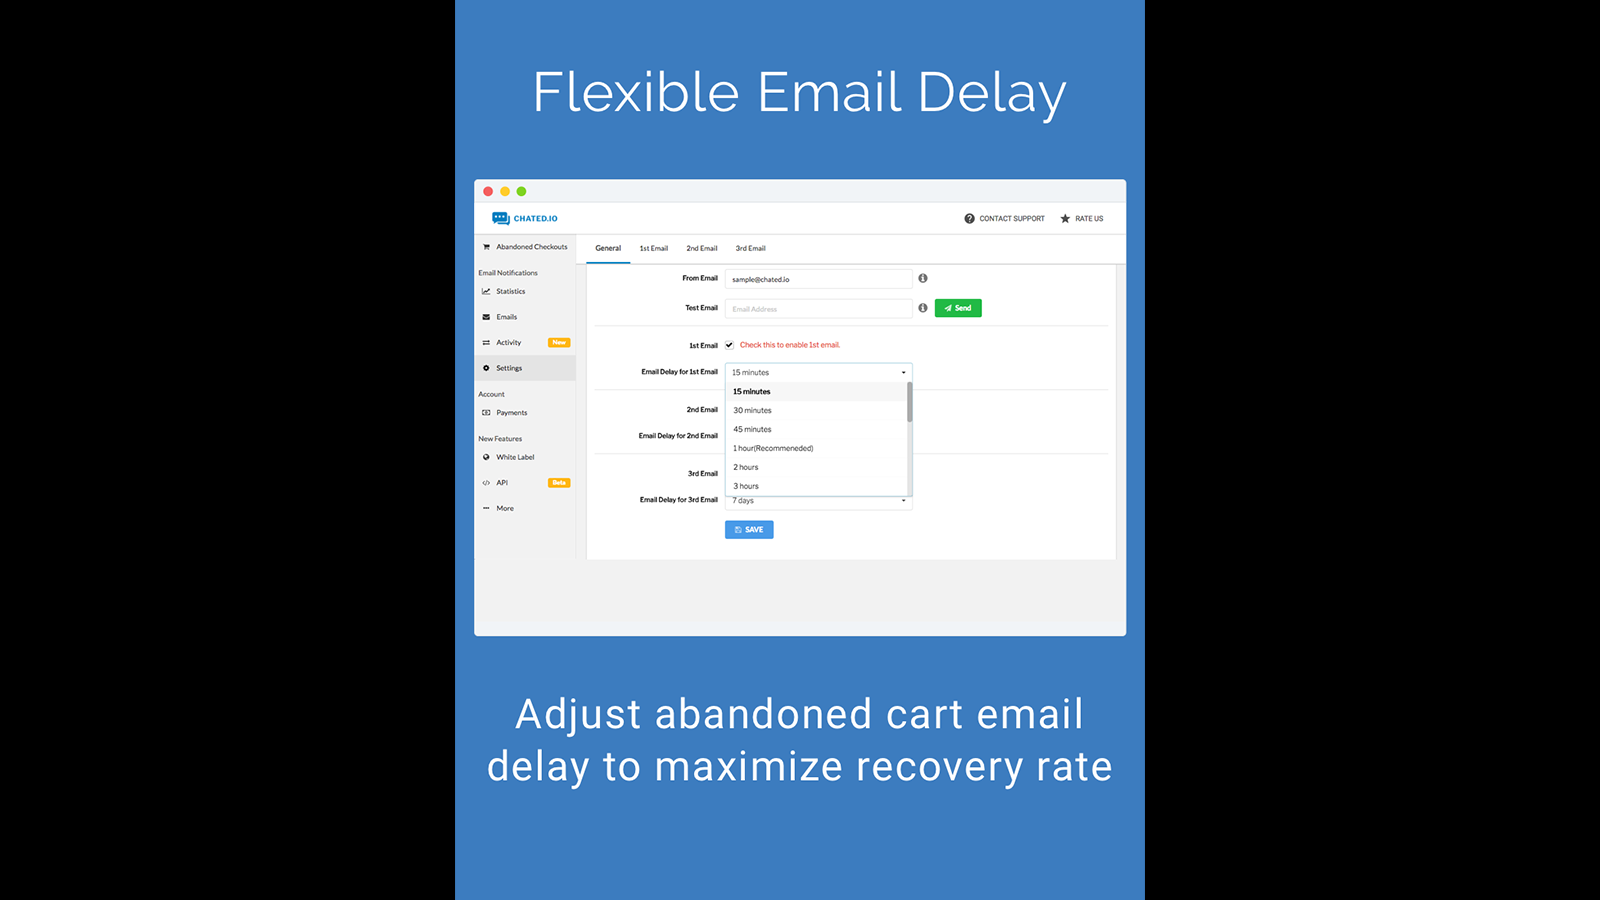 Flexible Email Delay